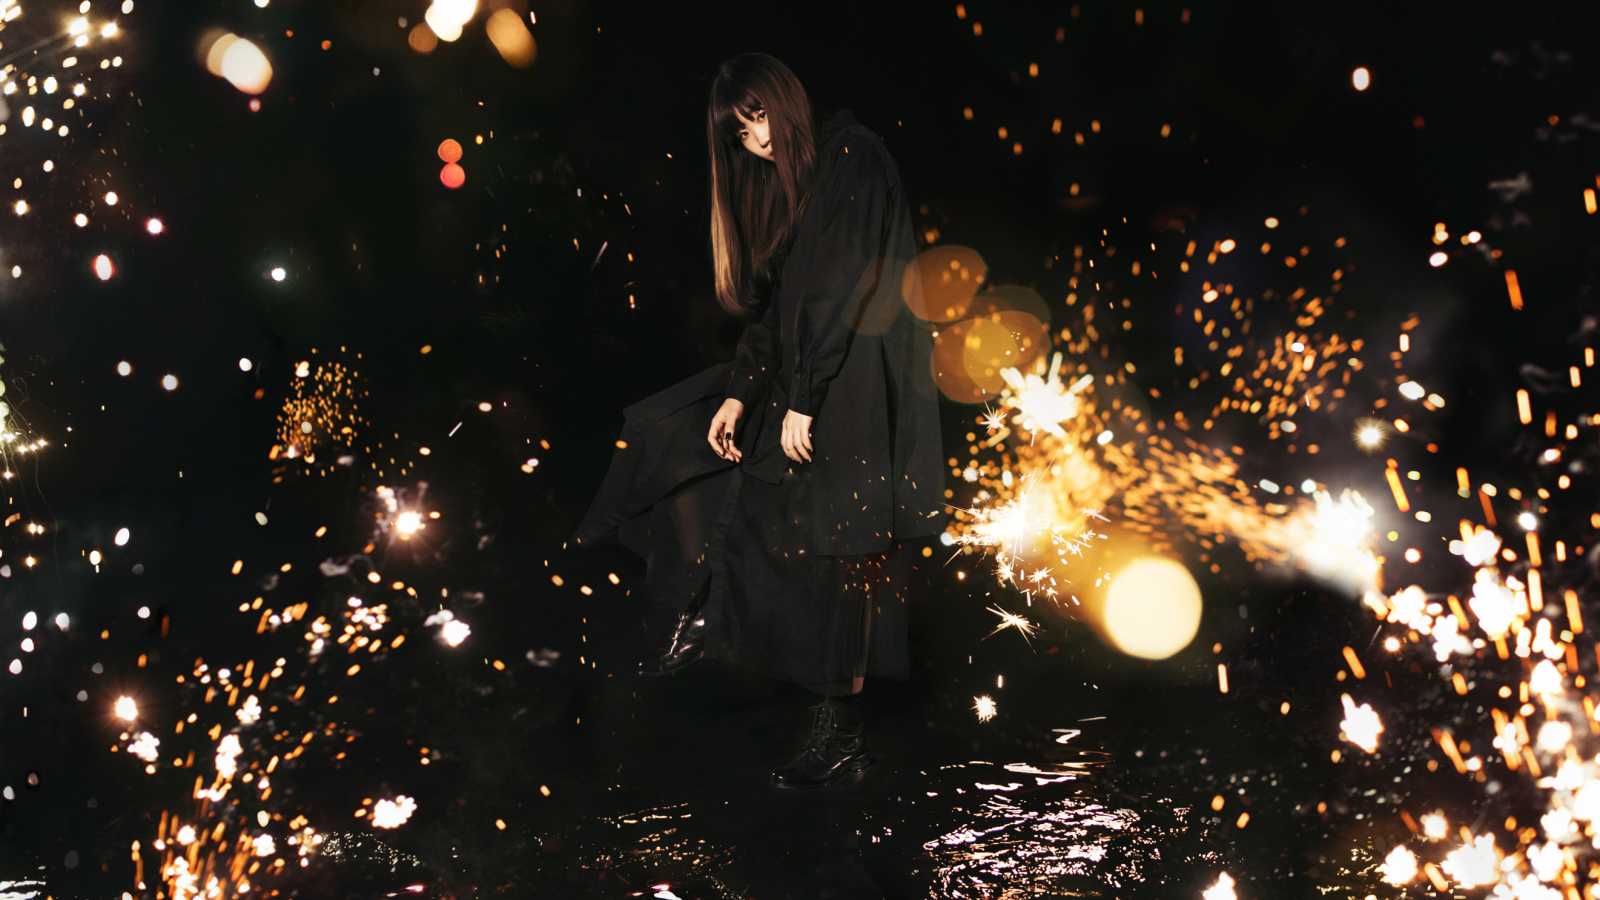 Aimer anuncia show online © Sony Music. All rights reserved.